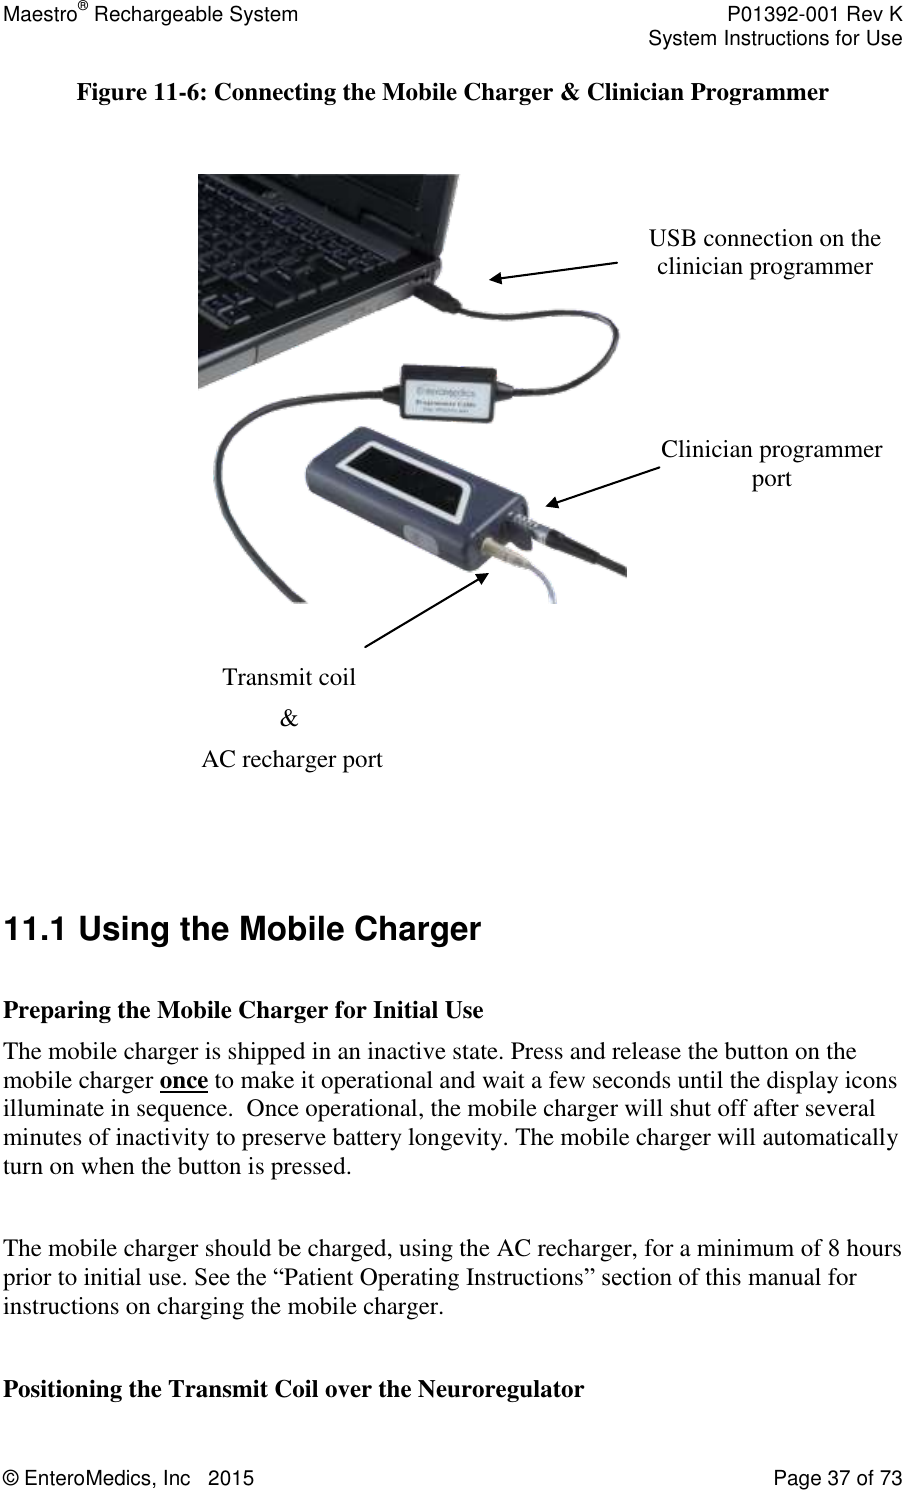 Maestro® Rechargeable System    P01392-001 Rev K     System Instructions for Use  © EnteroMedics, Inc   2015  Page 37 of 73  Figure 11-6: Connecting the Mobile Charger &amp; Clinician Programmer                    11.1 Using the Mobile Charger  Preparing the Mobile Charger for Initial Use The mobile charger is shipped in an inactive state. Press and release the button on the mobile charger once to make it operational and wait a few seconds until the display icons illuminate in sequence.  Once operational, the mobile charger will shut off after several minutes of inactivity to preserve battery longevity. The mobile charger will automatically turn on when the button is pressed.  The mobile charger should be charged, using the AC recharger, for a minimum of 8 hours prior to initial use. See the “Patient Operating Instructions” section of this manual for instructions on charging the mobile charger.   Positioning the Transmit Coil over the Neuroregulator Clinician programmer port USB connection on the clinician programmer connection Transmit coil  &amp;  AC recharger port  